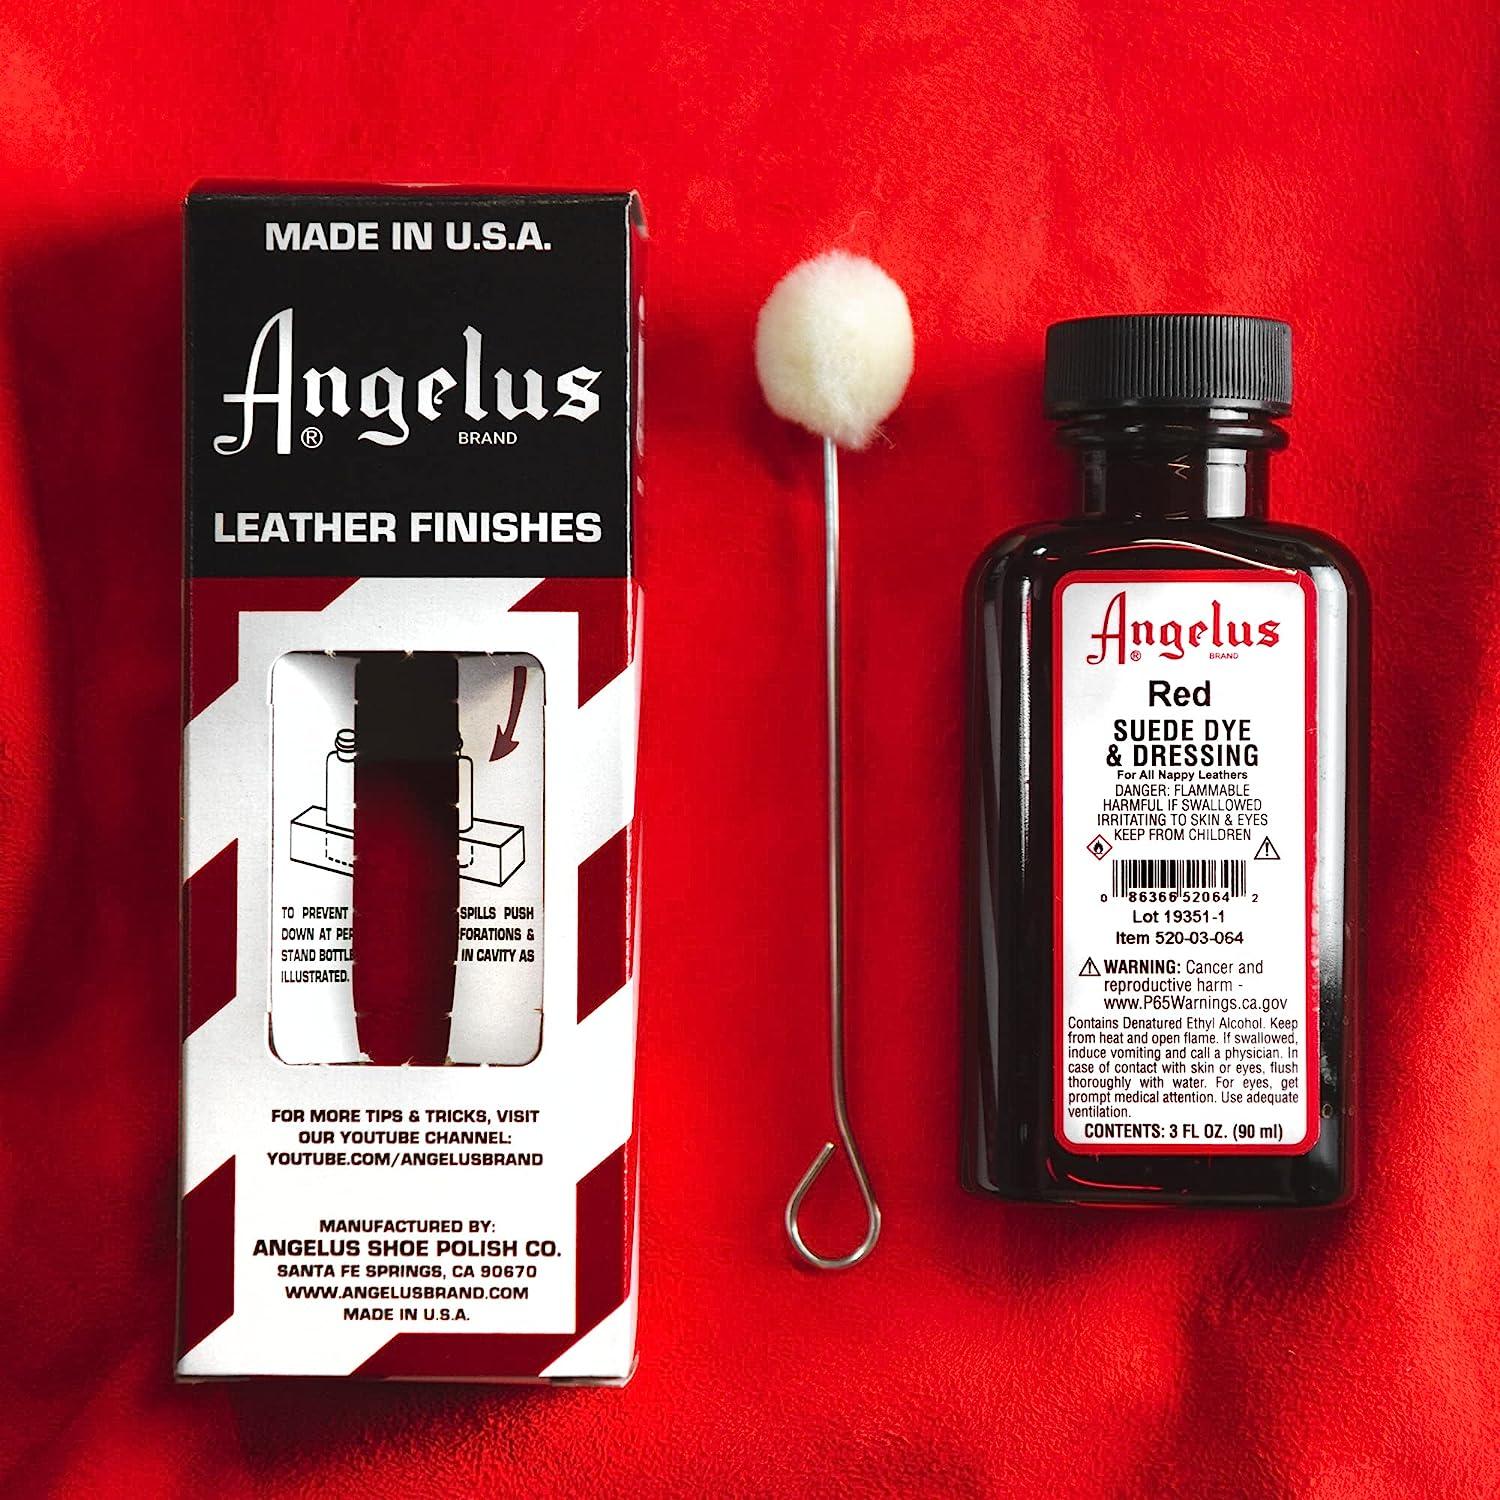 Angelus Suede Leather Dye & Dressing 3 Oz Black And Jet Black Leather Dye.